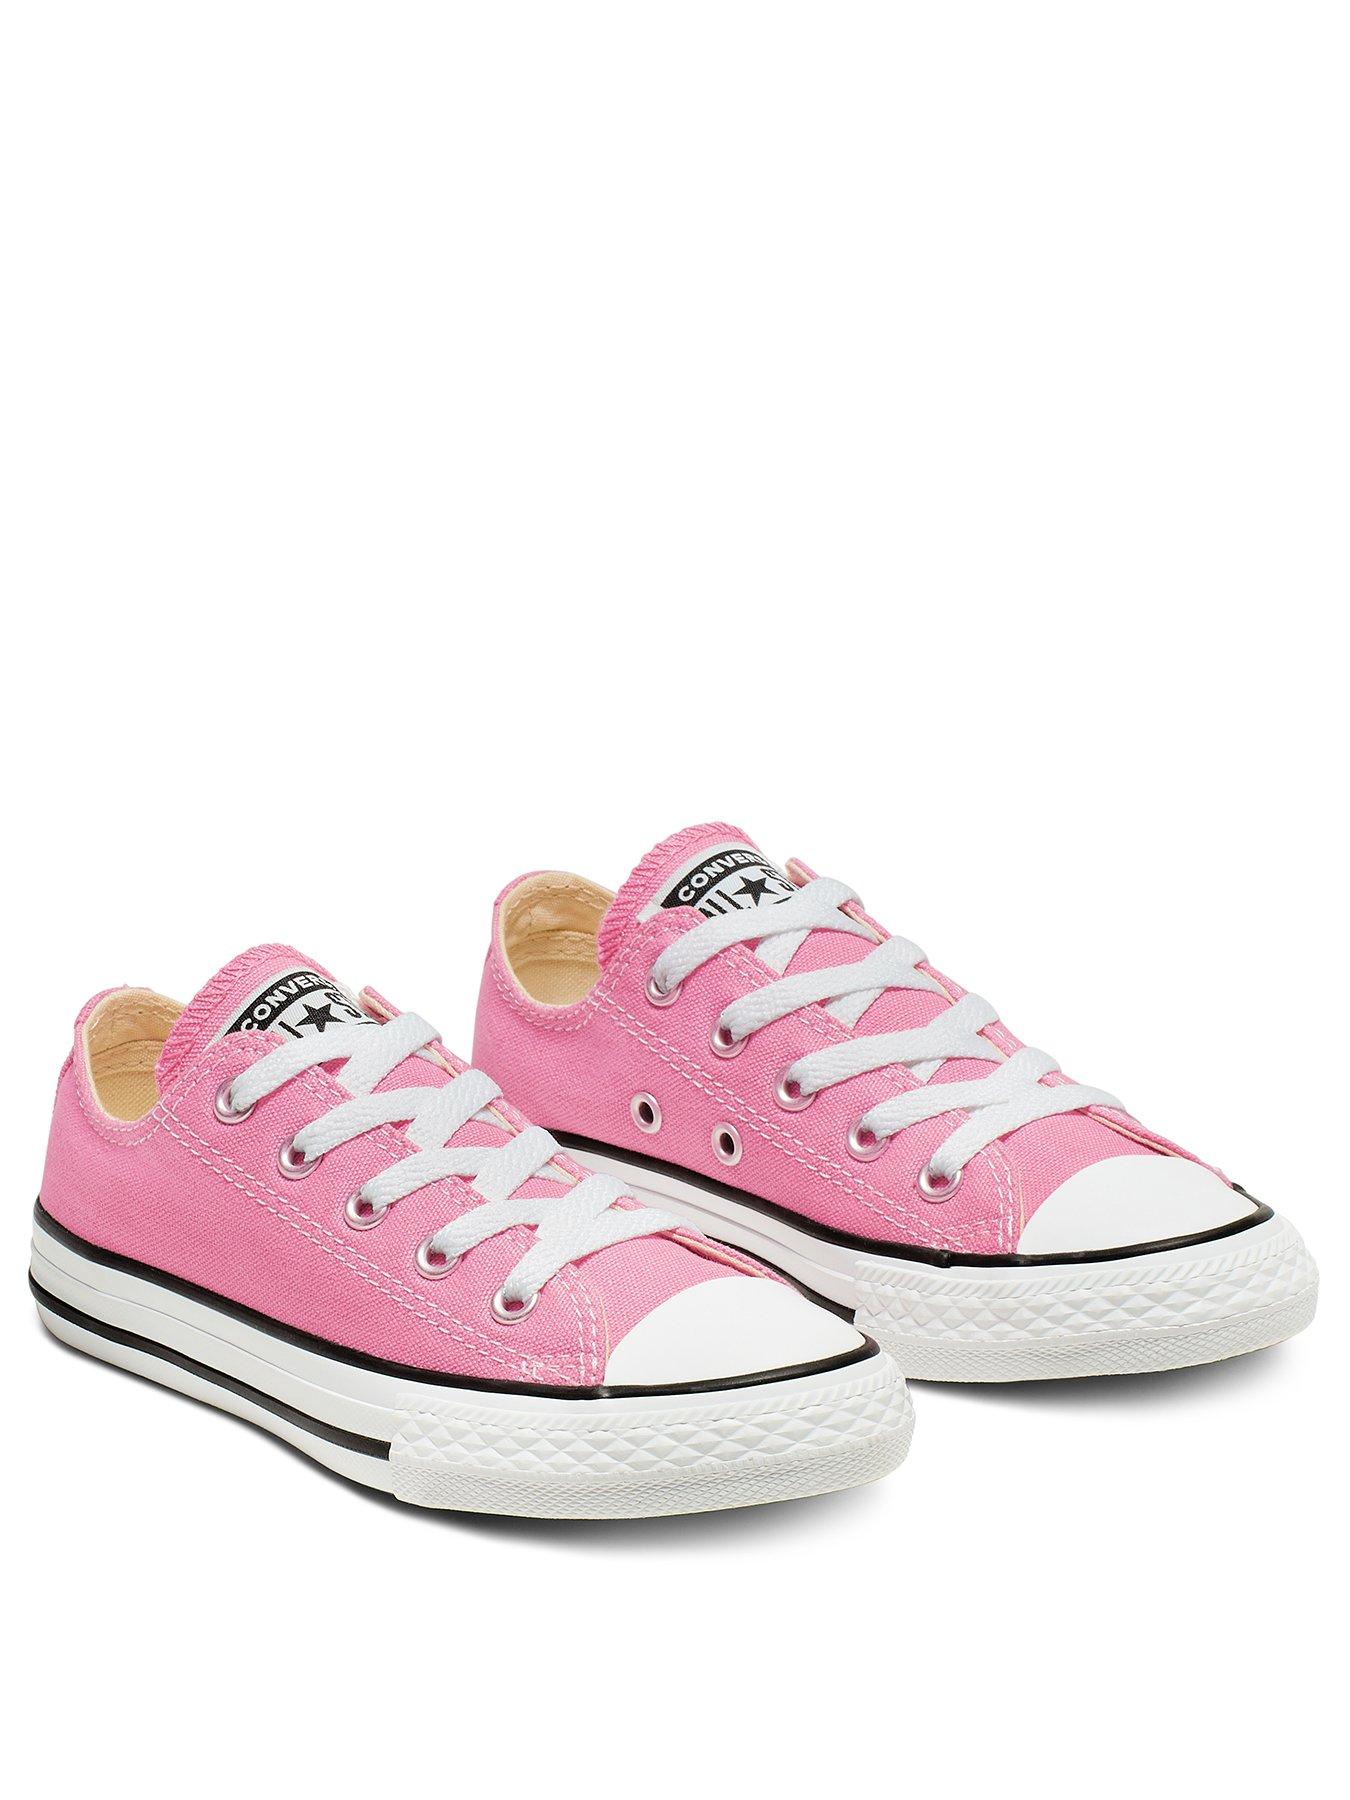 baby girl converse size 4